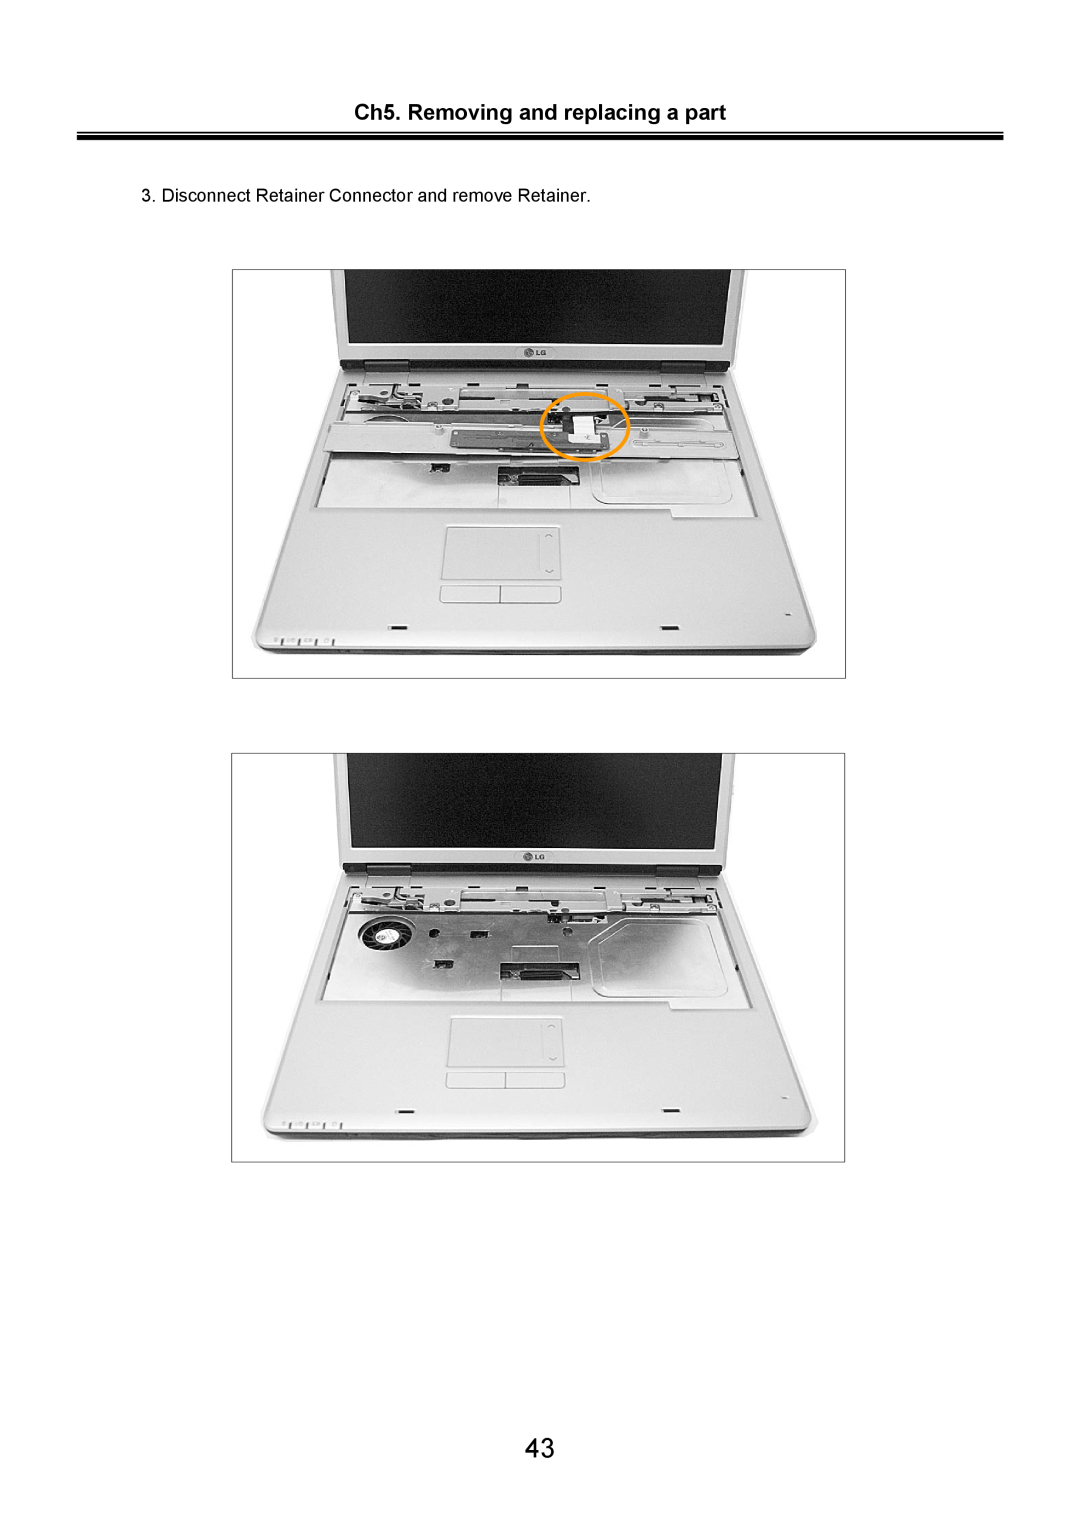 LG Electronics LS70 service manual Ch5. Removing and replacing a part, Disconnect Retainer Connector and remove Retainer 